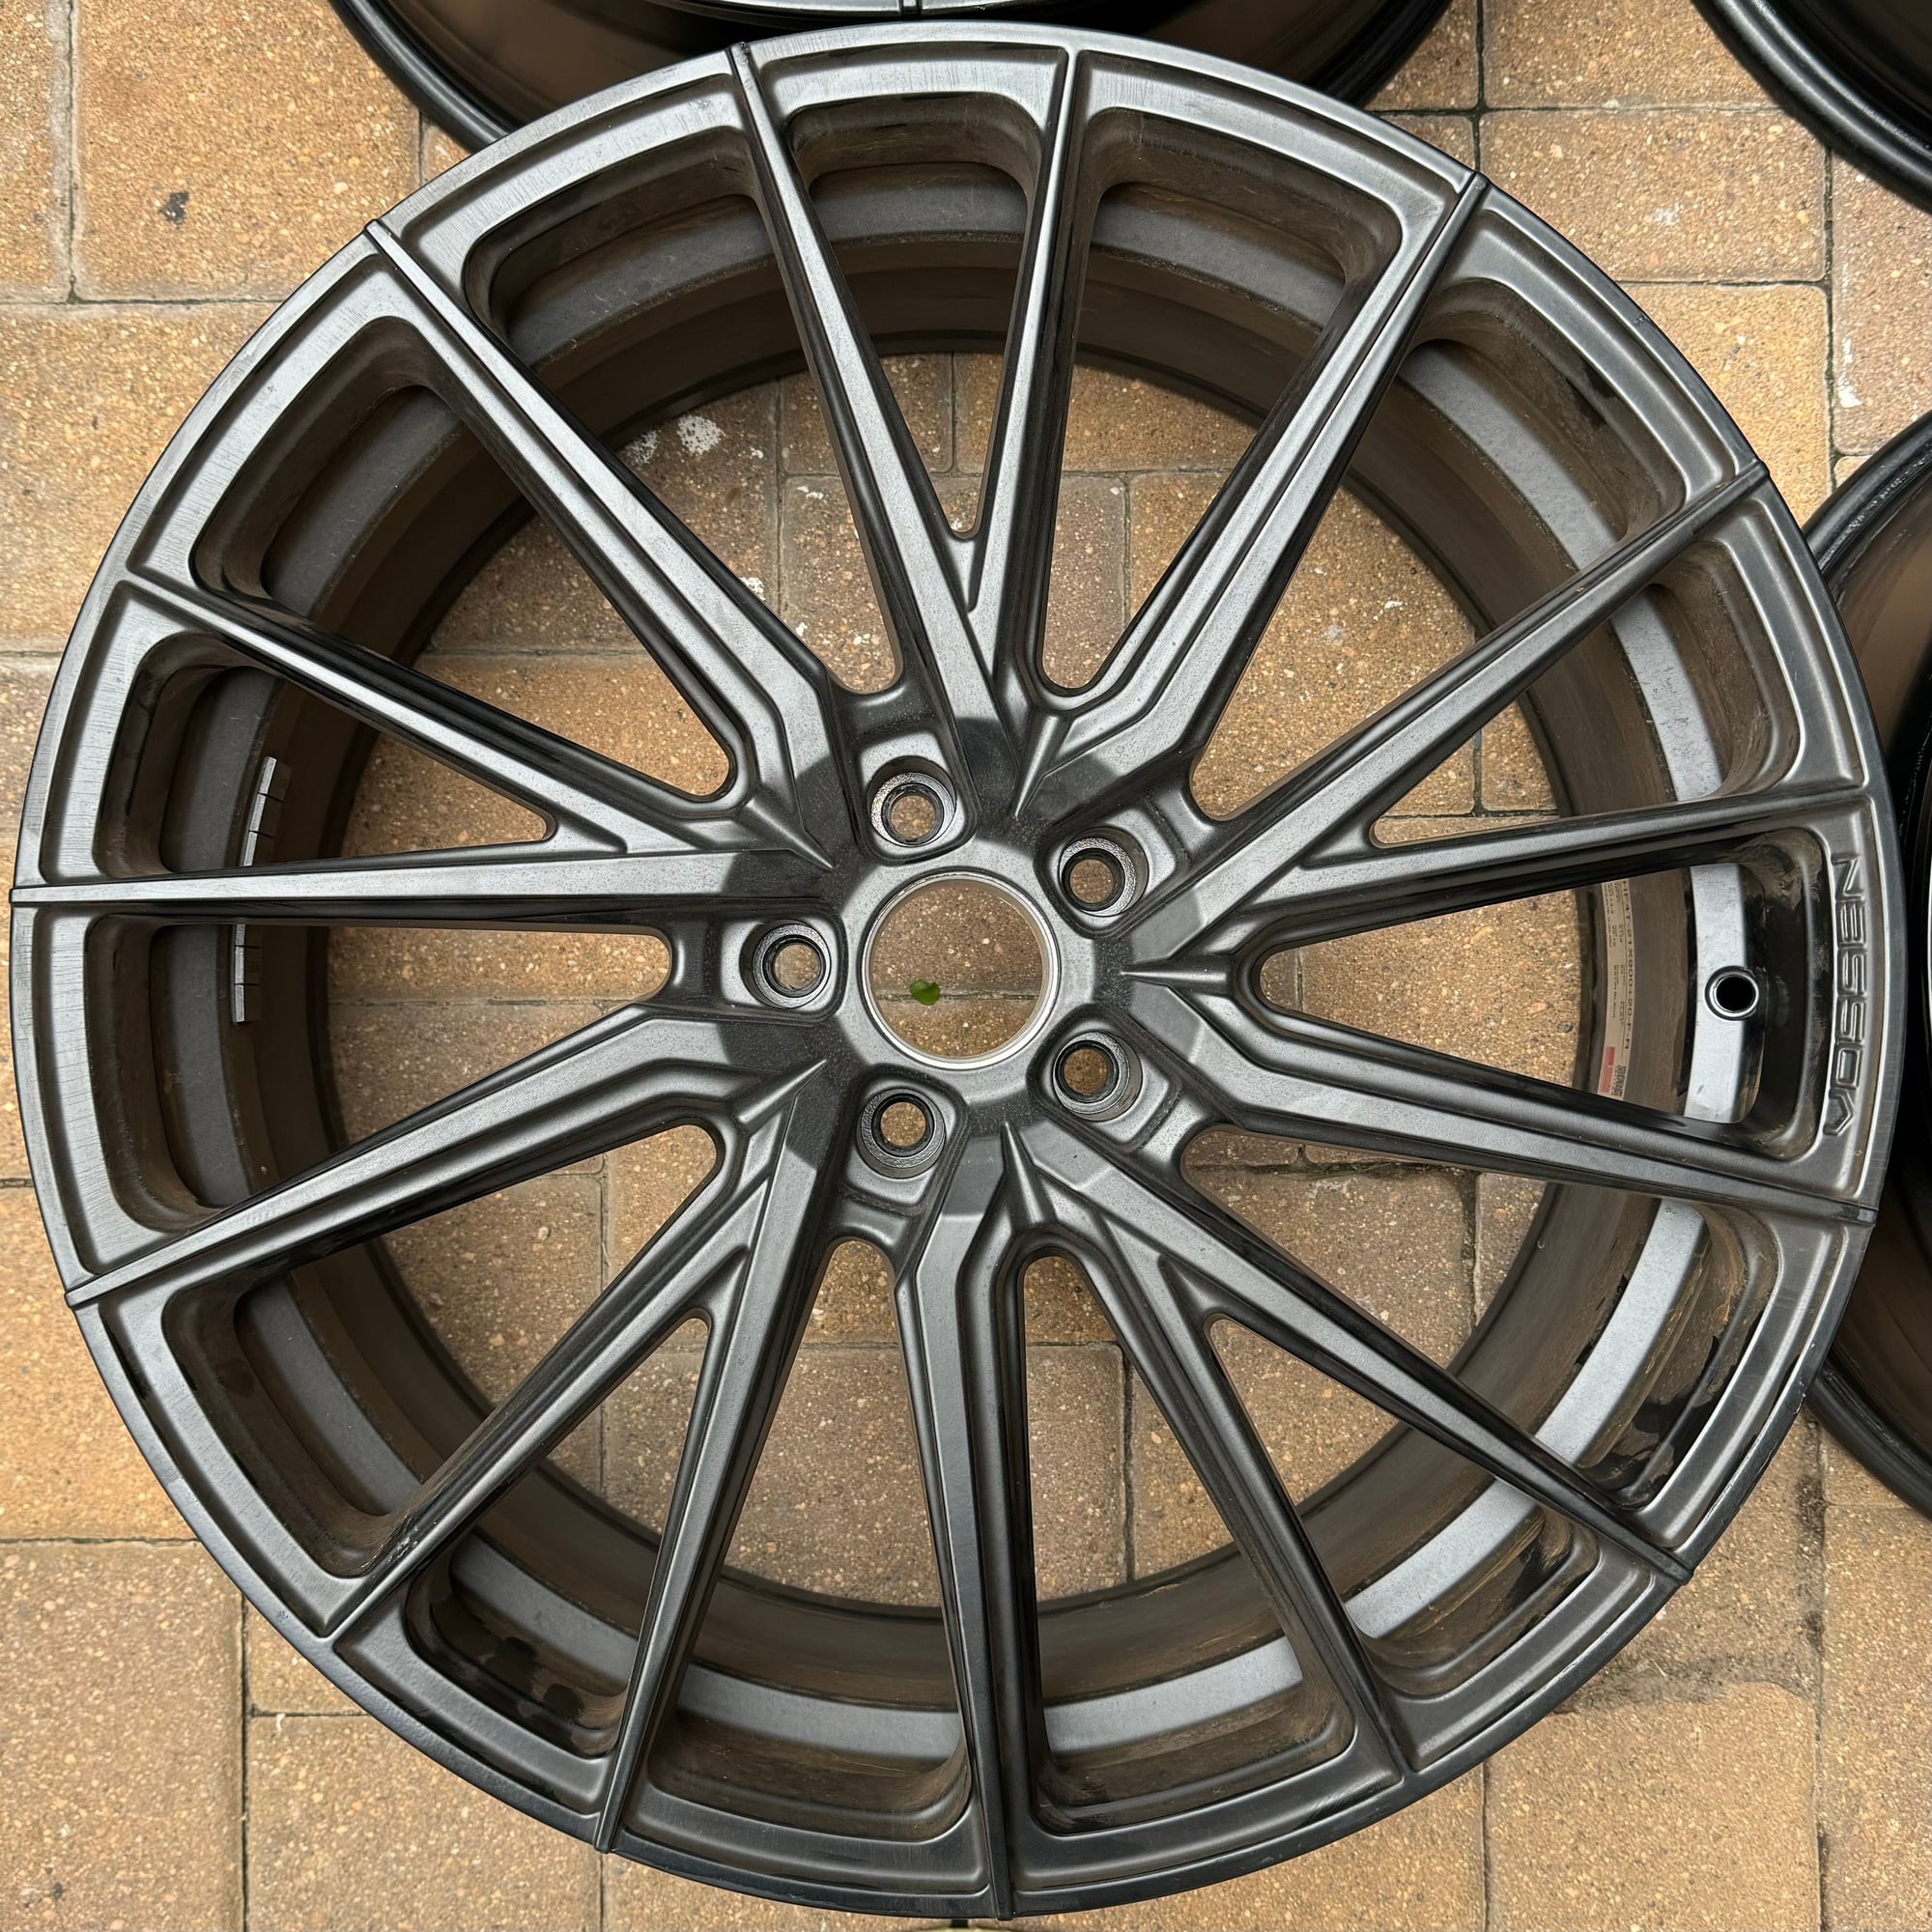 Wheels and Tires/Axles - Vossen Hybrid Forged HF-4T 21x9 +25 - Used - Metro Houston, TX 77498, United States